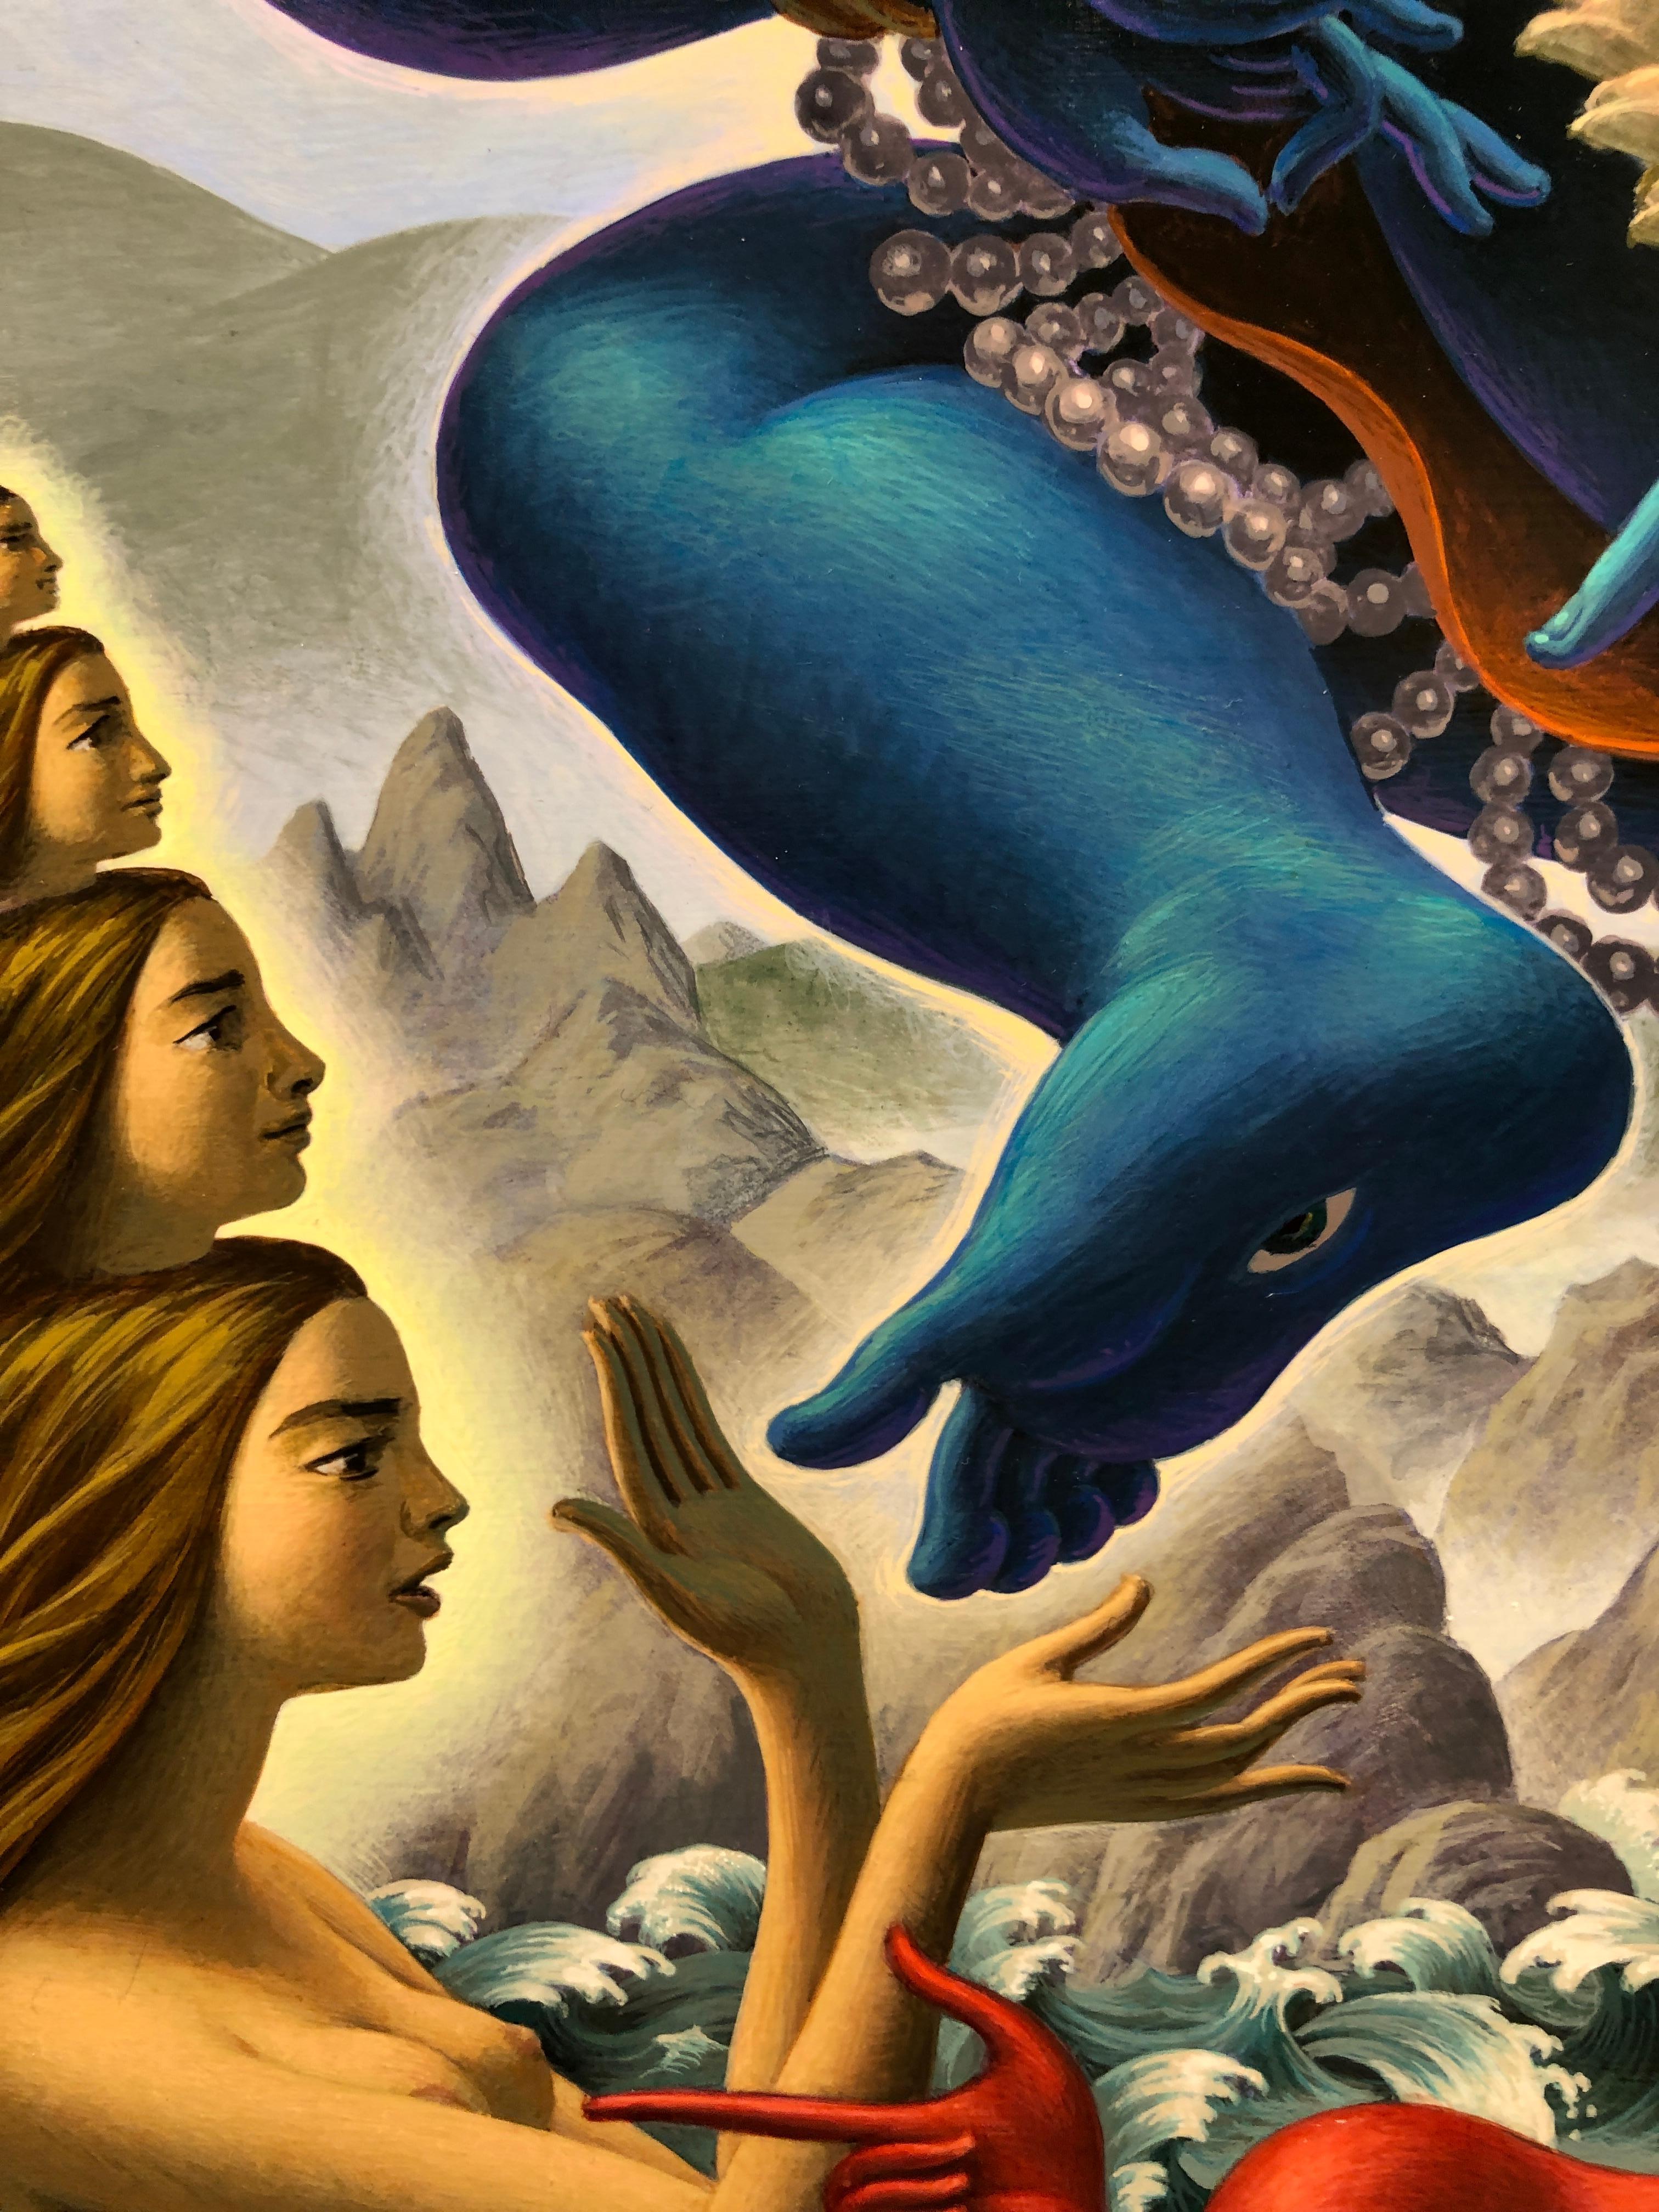 Ganesh at the Maelstrom - Highly Detailed Surreal, Symbolic Painting 8